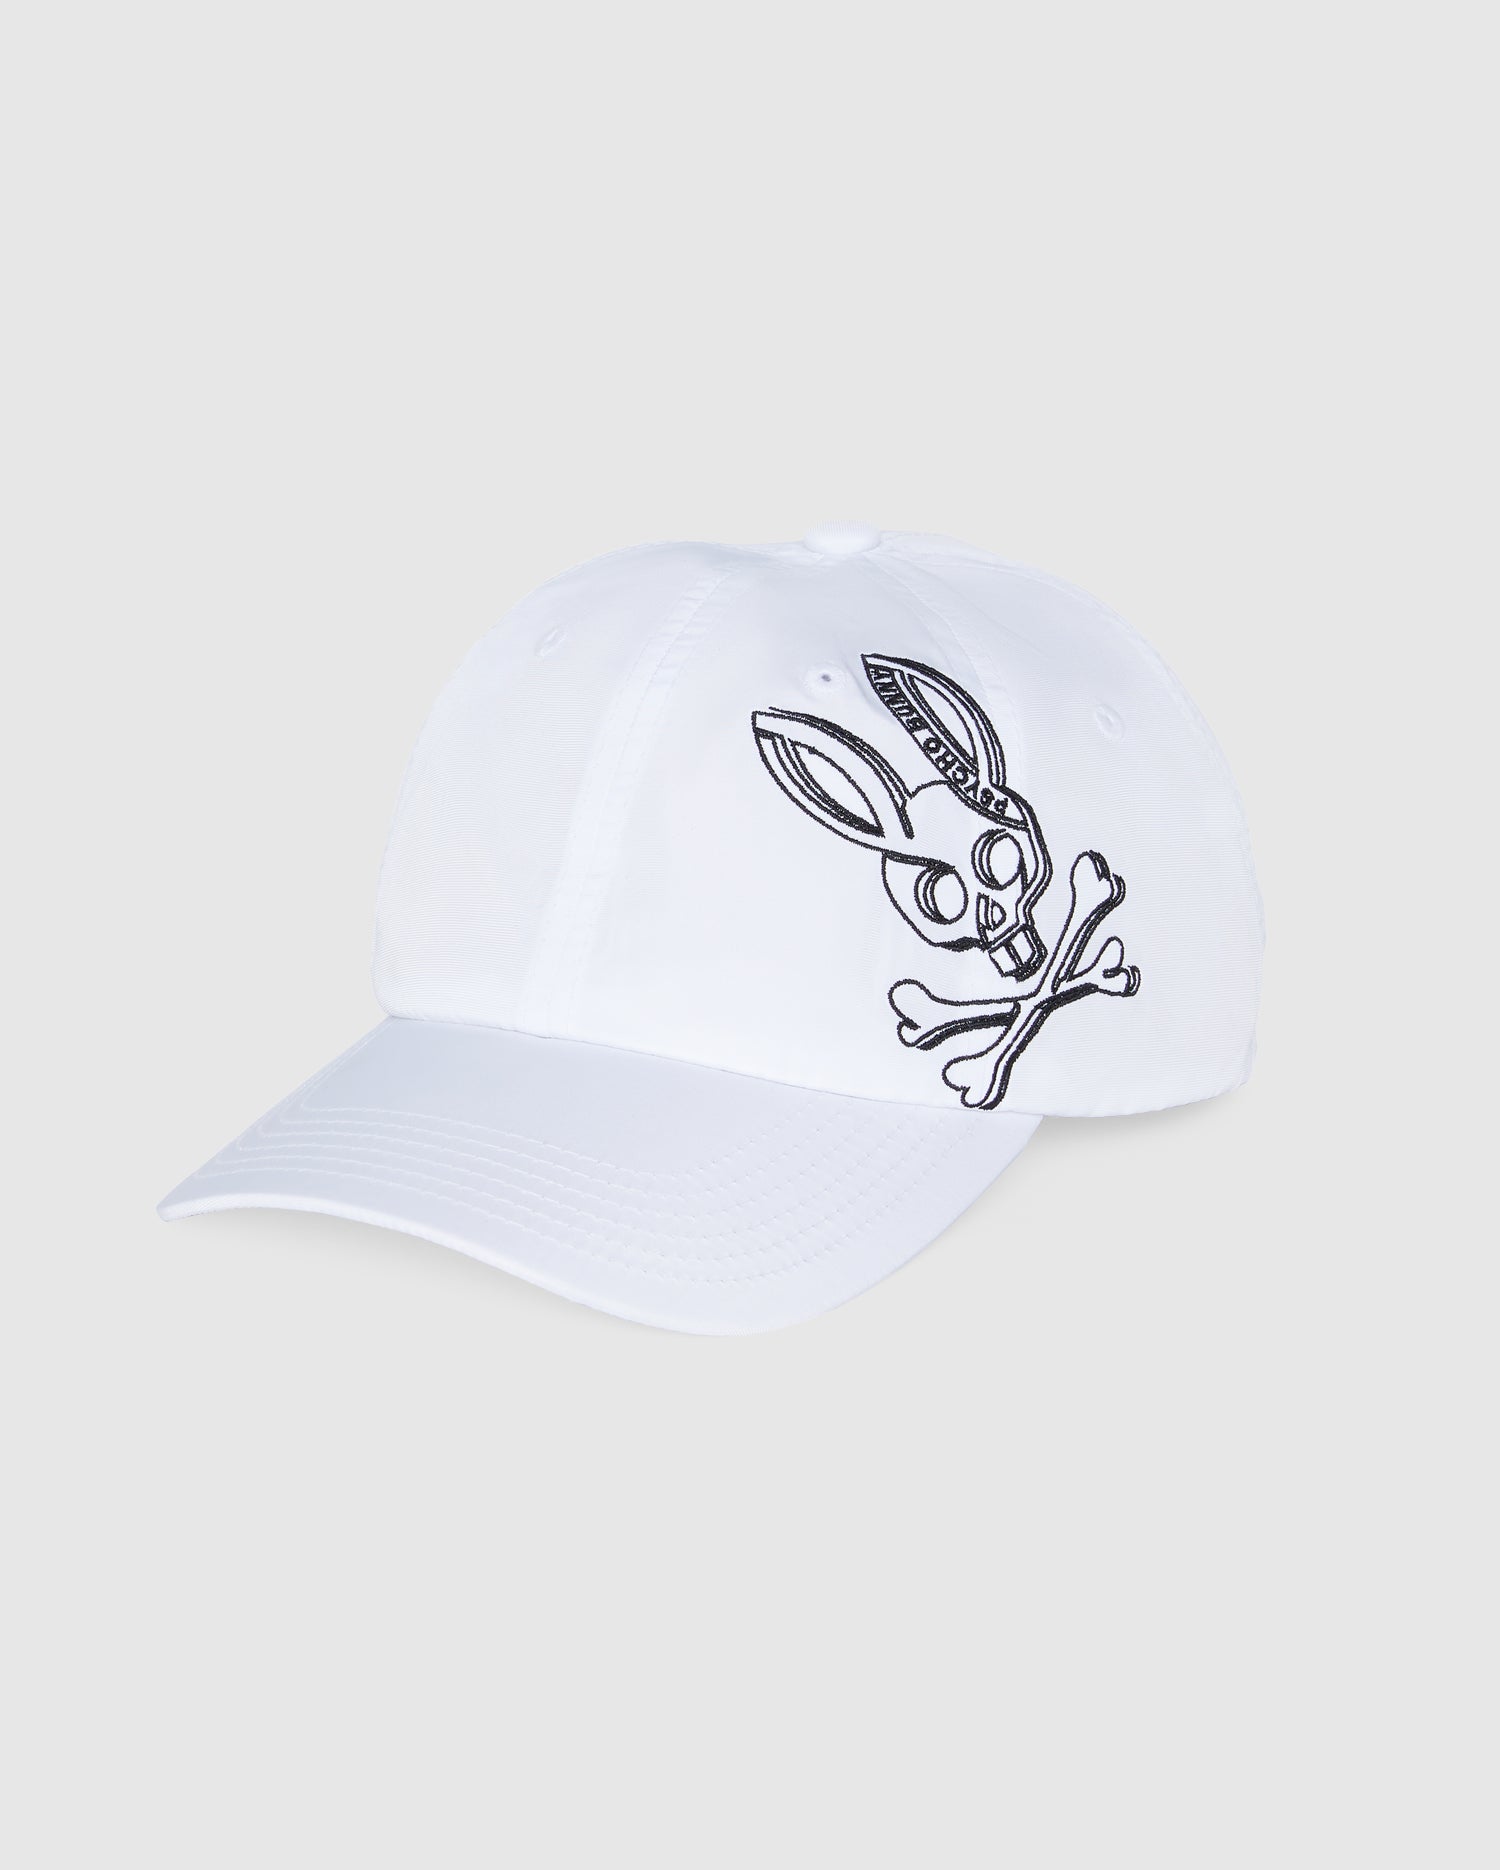 Baseball Hat Features